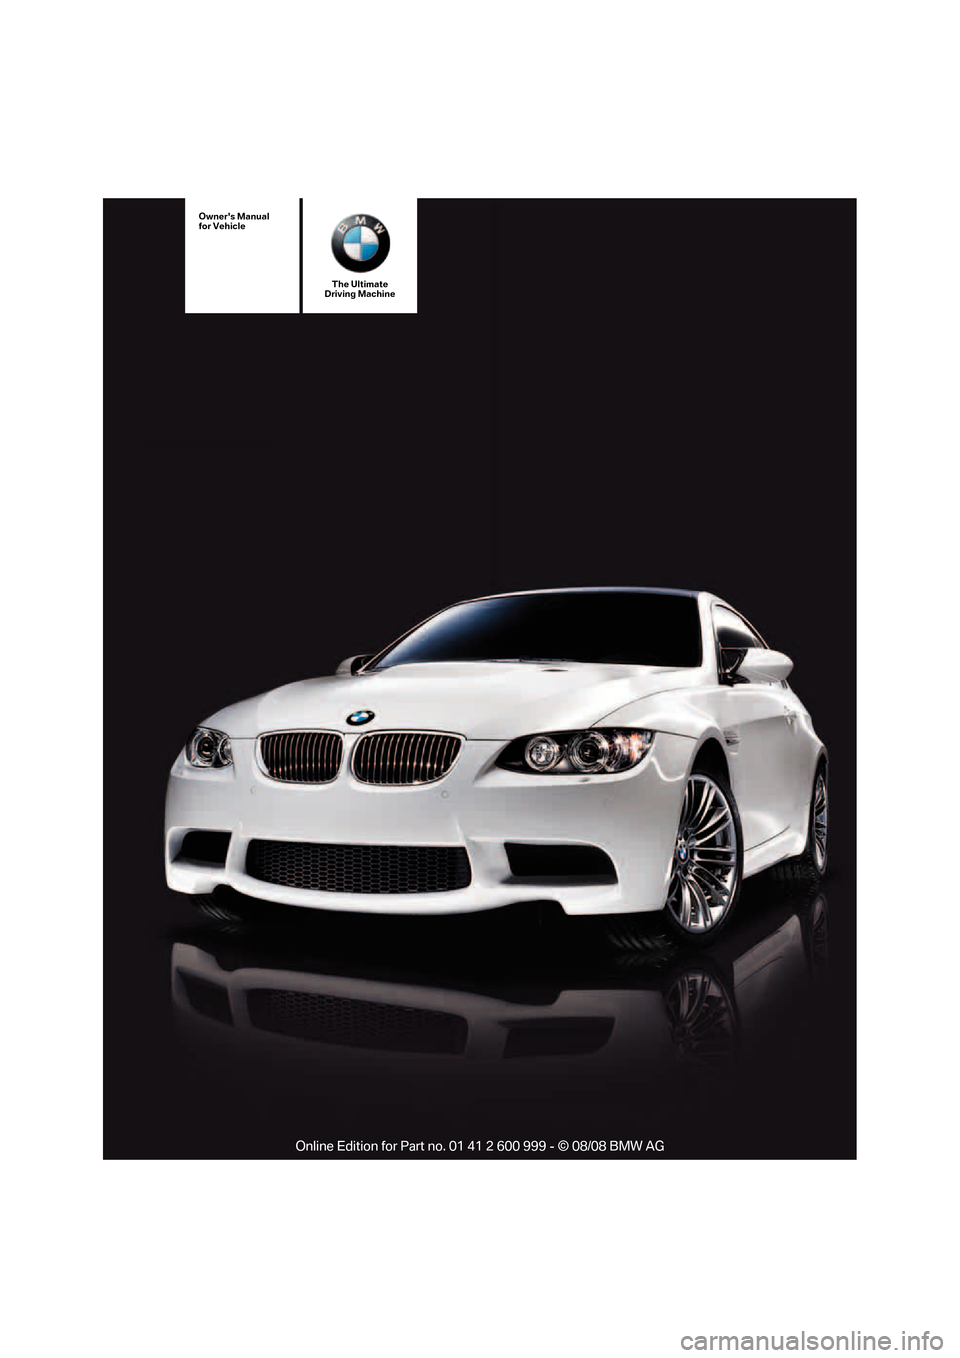 BMW M3 COUPE 2009 E92 Owners Manual The Ultimate
Driving Machine
Owners Manual
for Vehicle
ba8_E9293M3_cic.book  Seite 1  Dienstag, 19. August 2008  12:01 12 